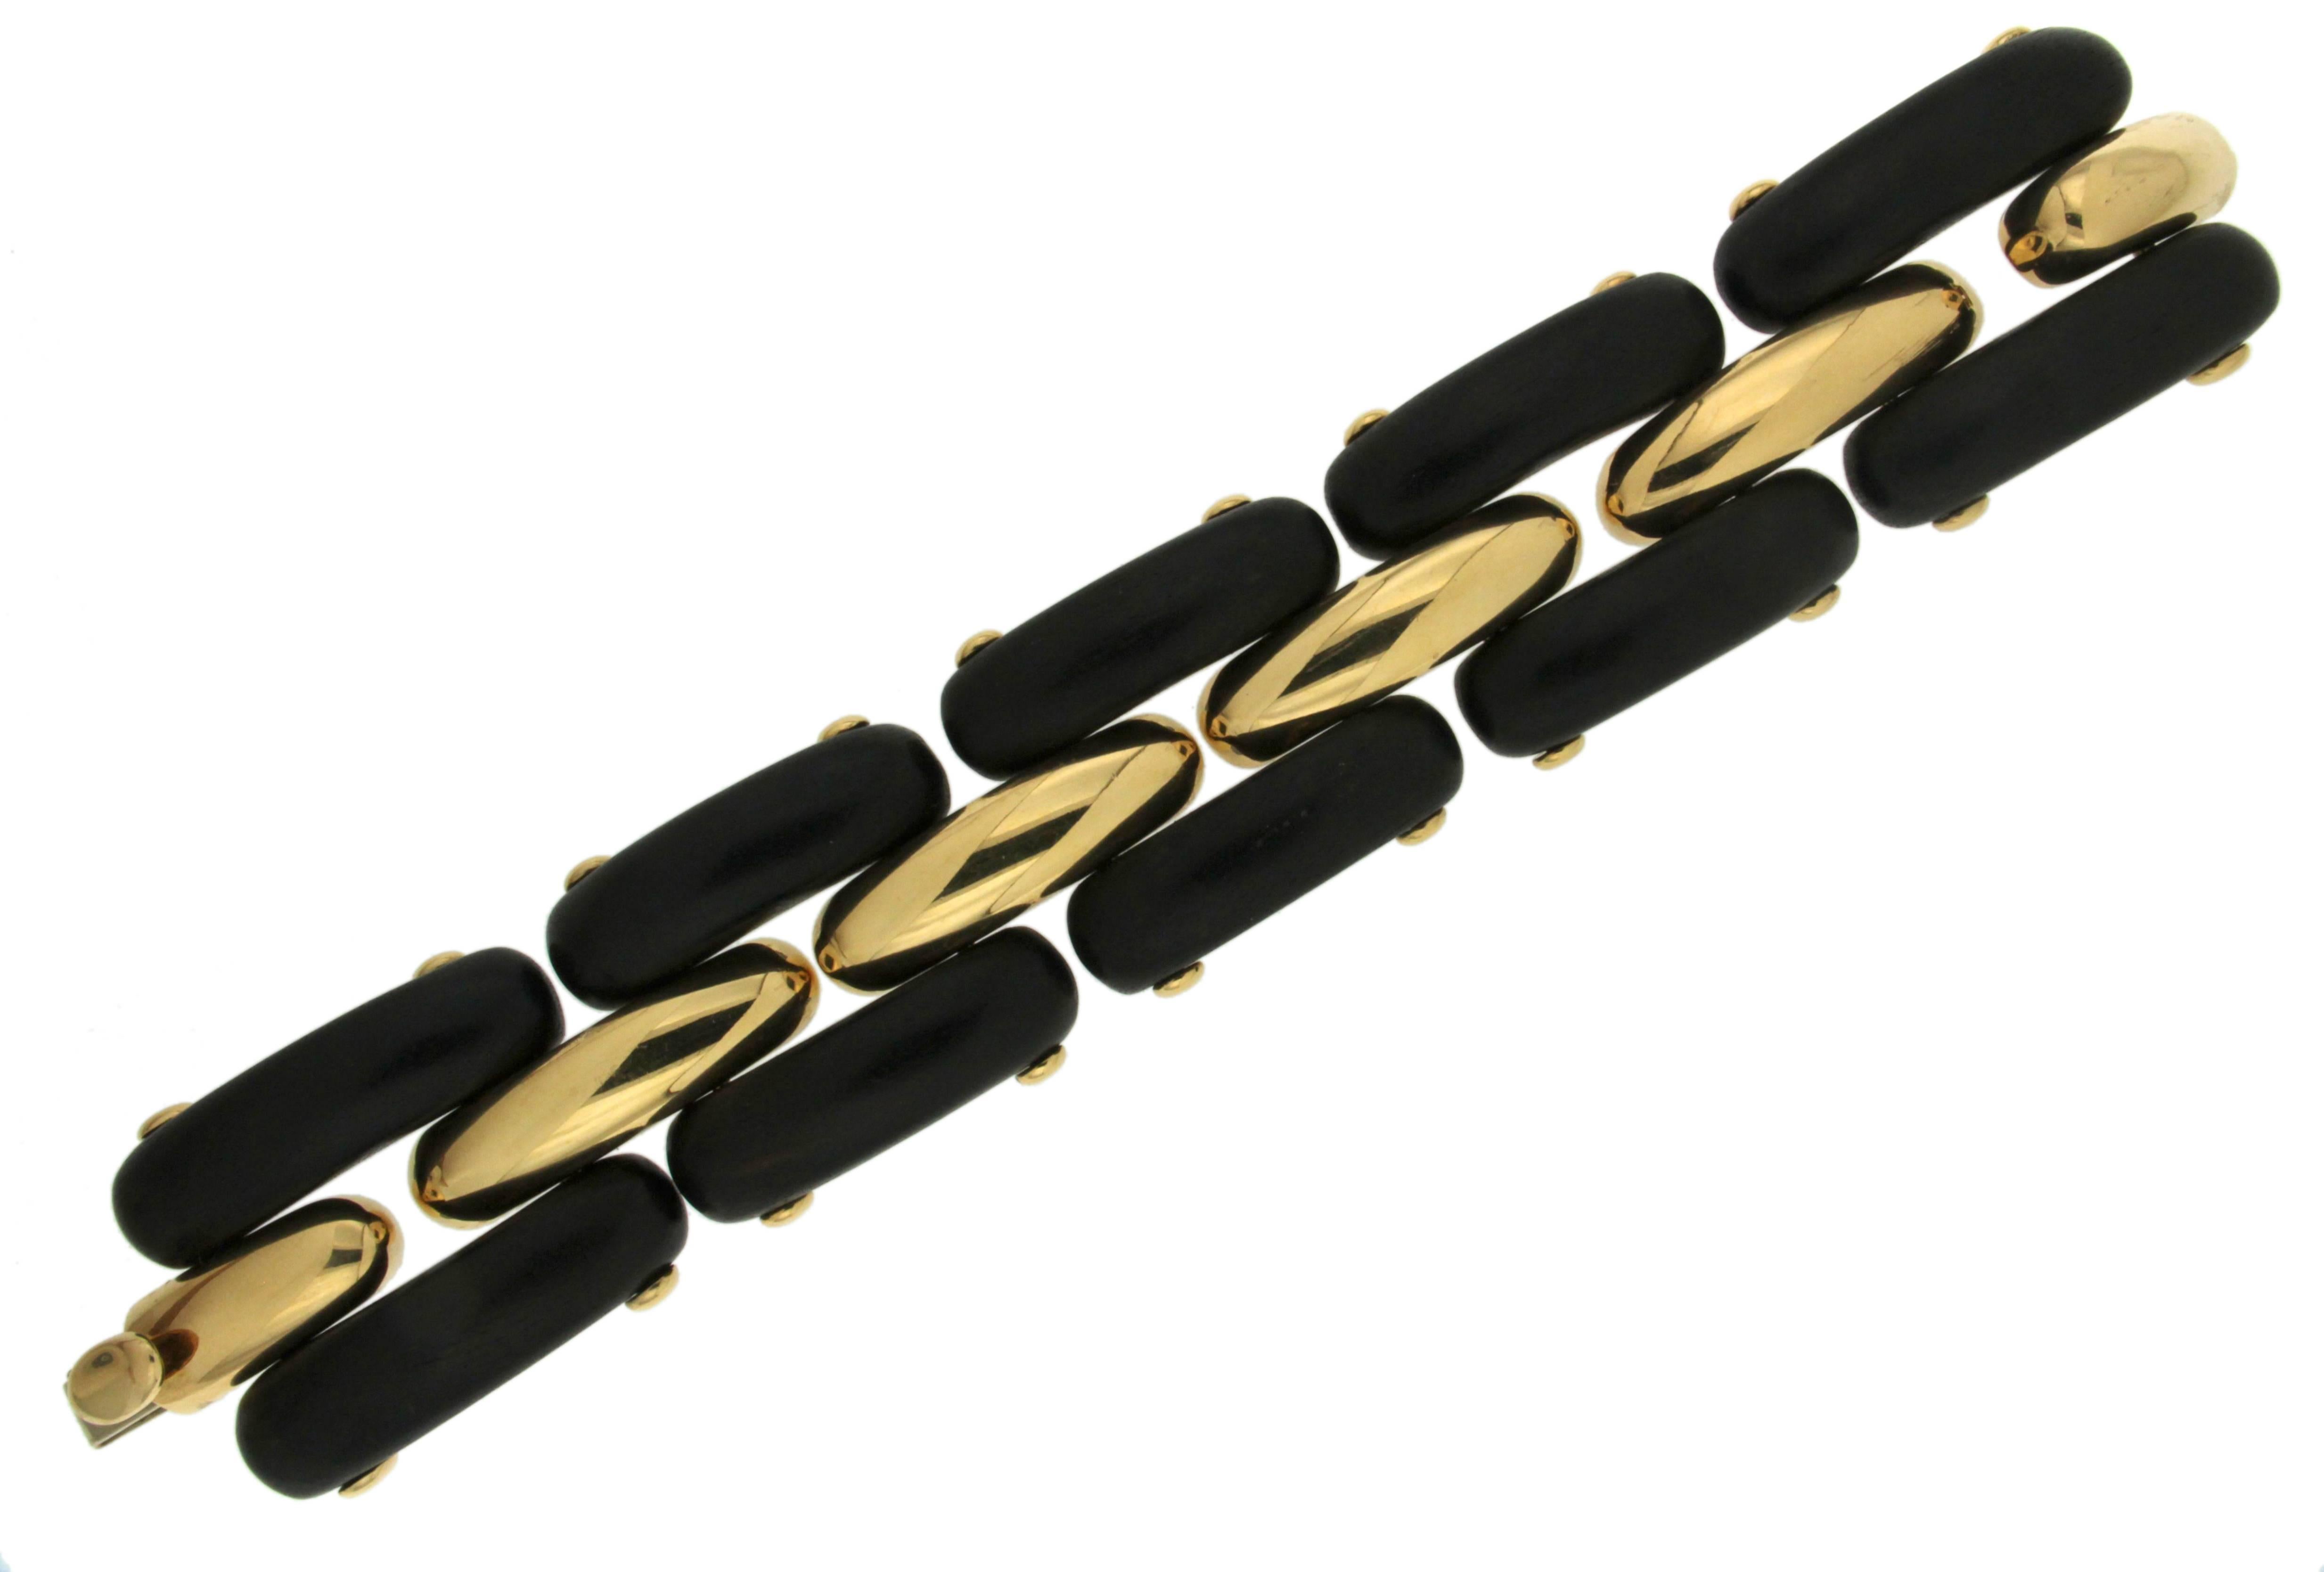 This flexible bracelet is made with five sections of wood and 18kt yellow gold connectors in between.